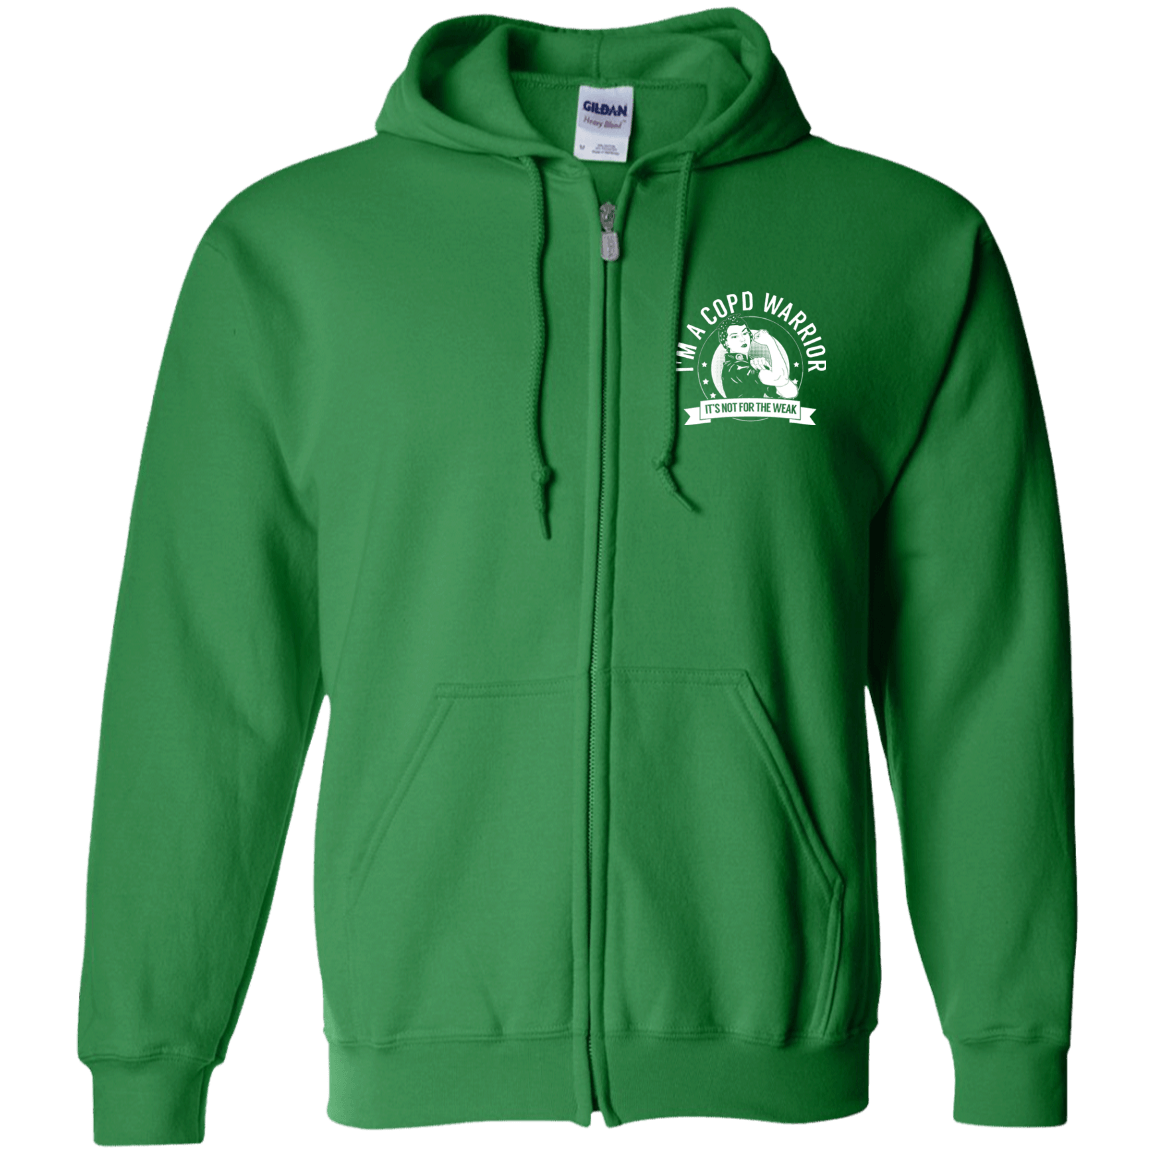 Chronic Obstructive Pulmonary Disease - COPD Warrior NFTW Zip Up Hooded Sweatshirt - The Unchargeables